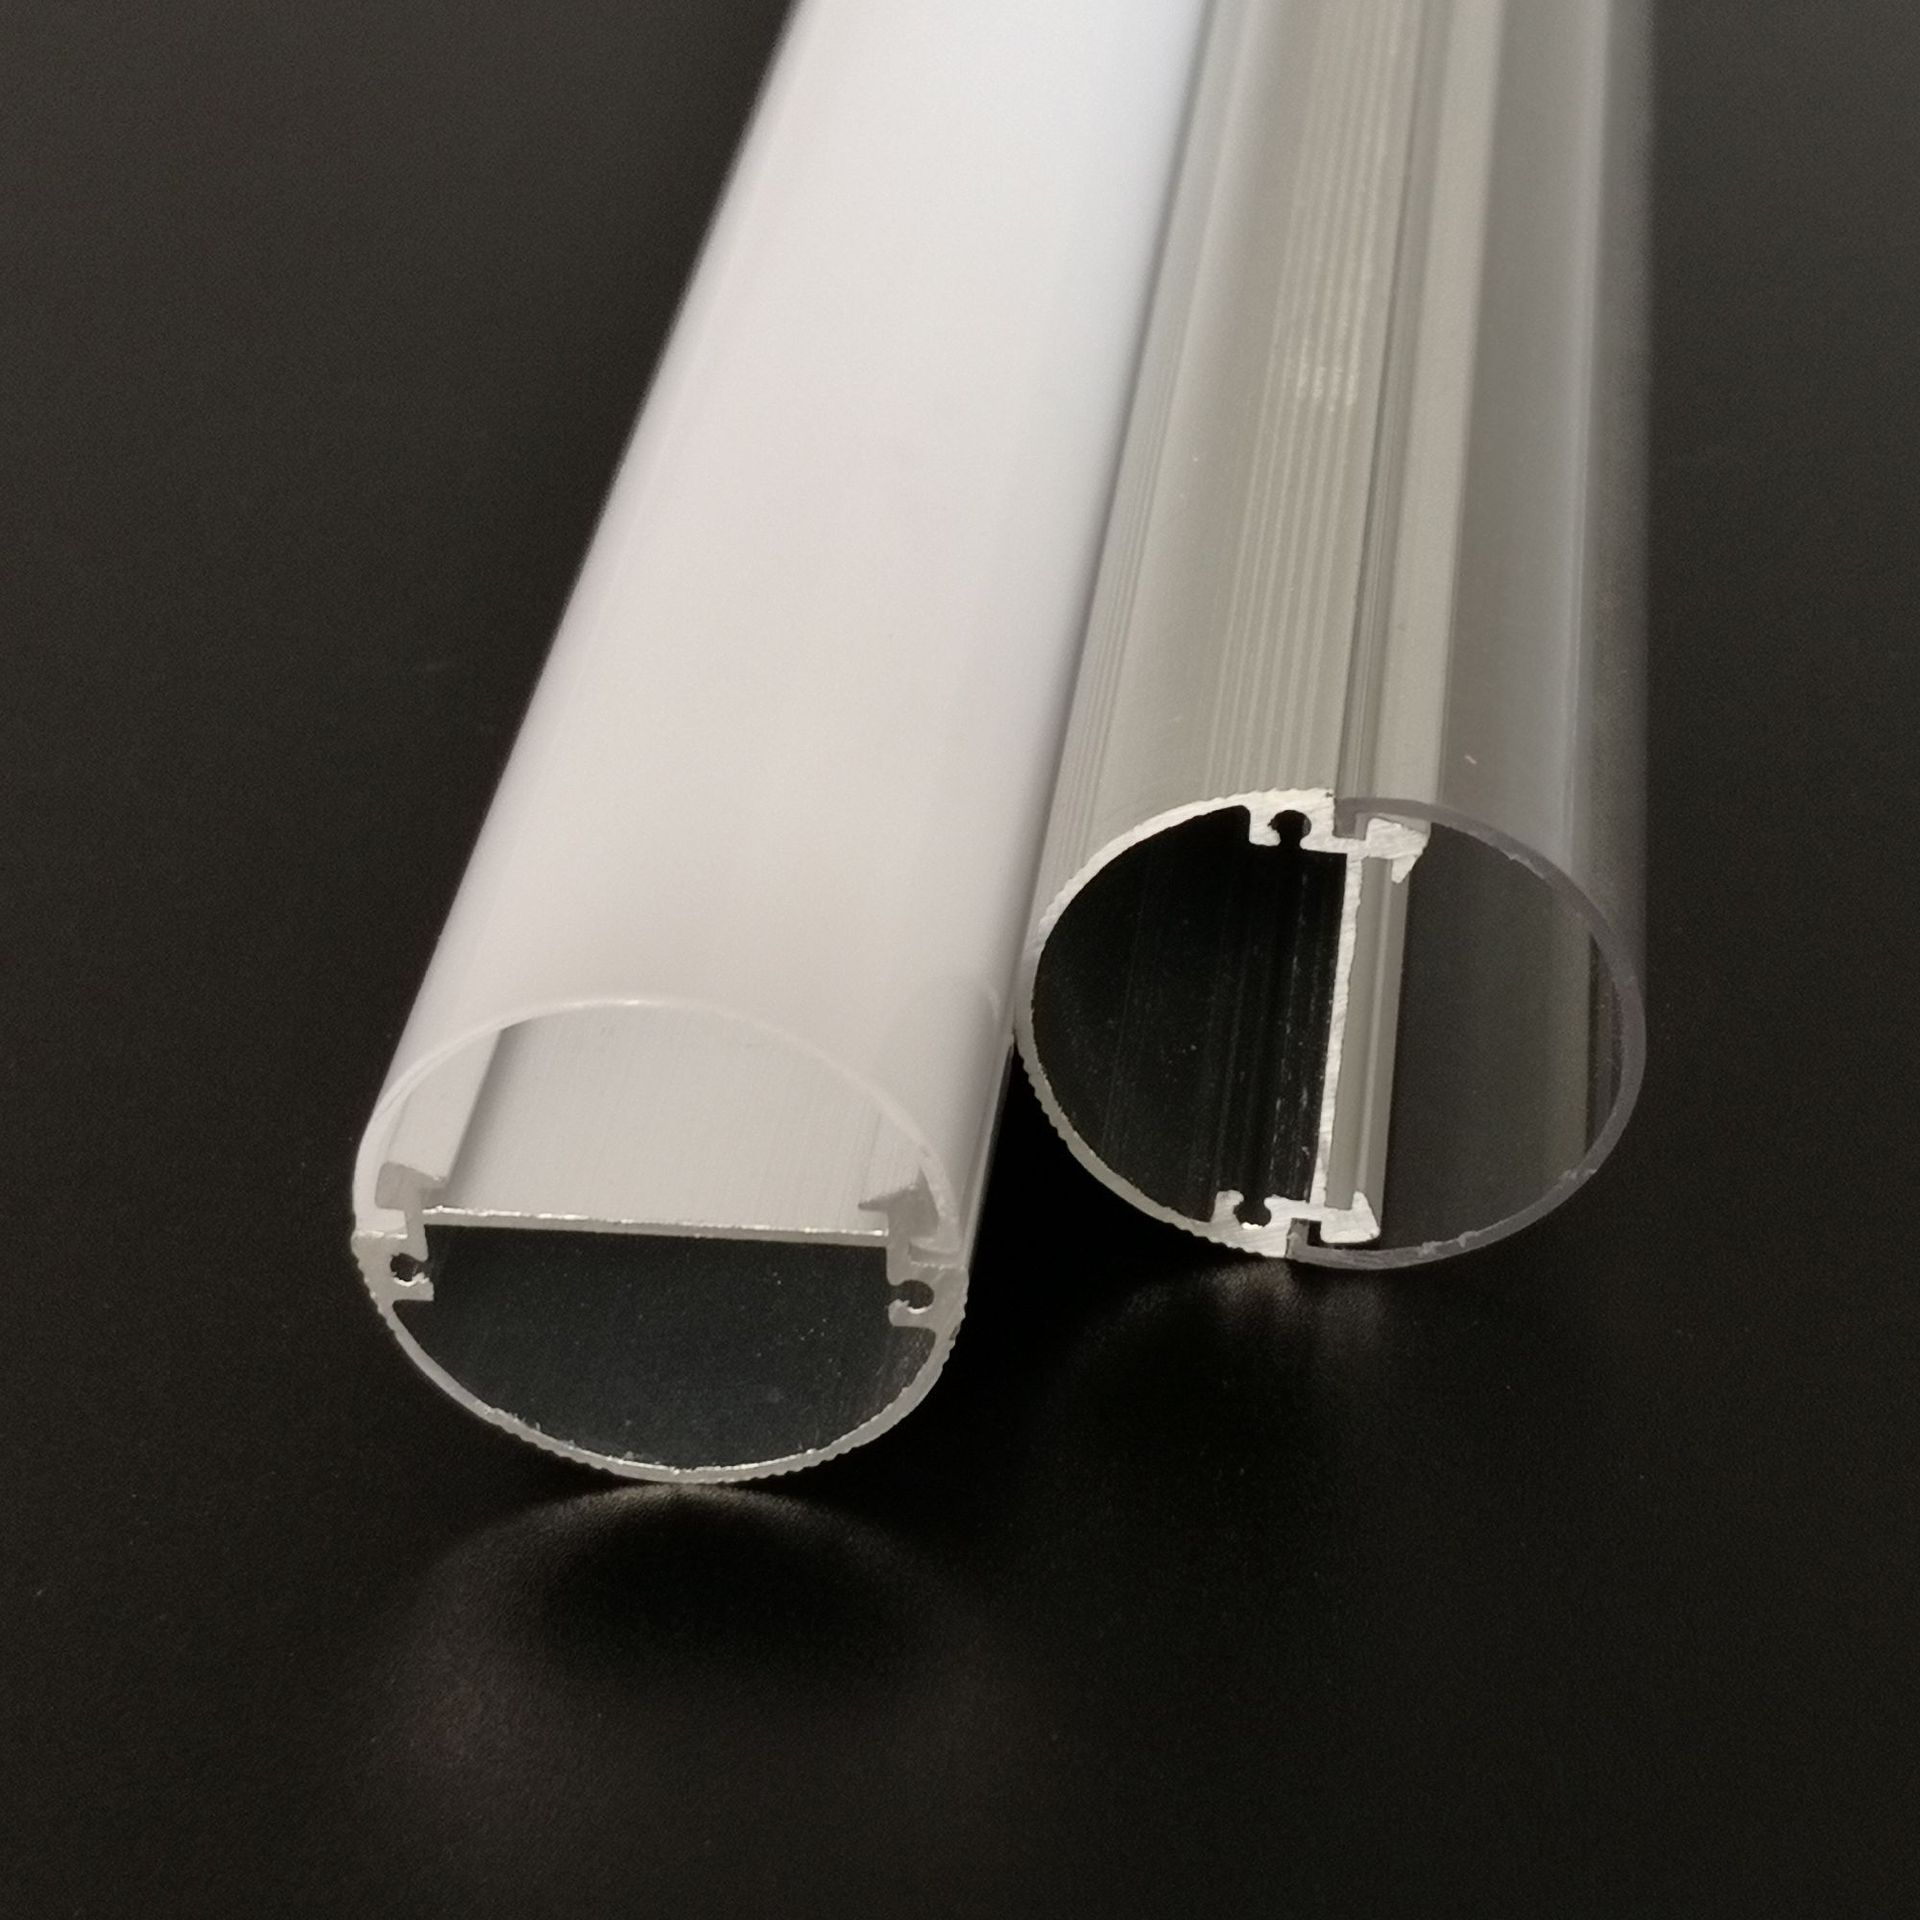 Can PC extruded tubes be used for linear lighting